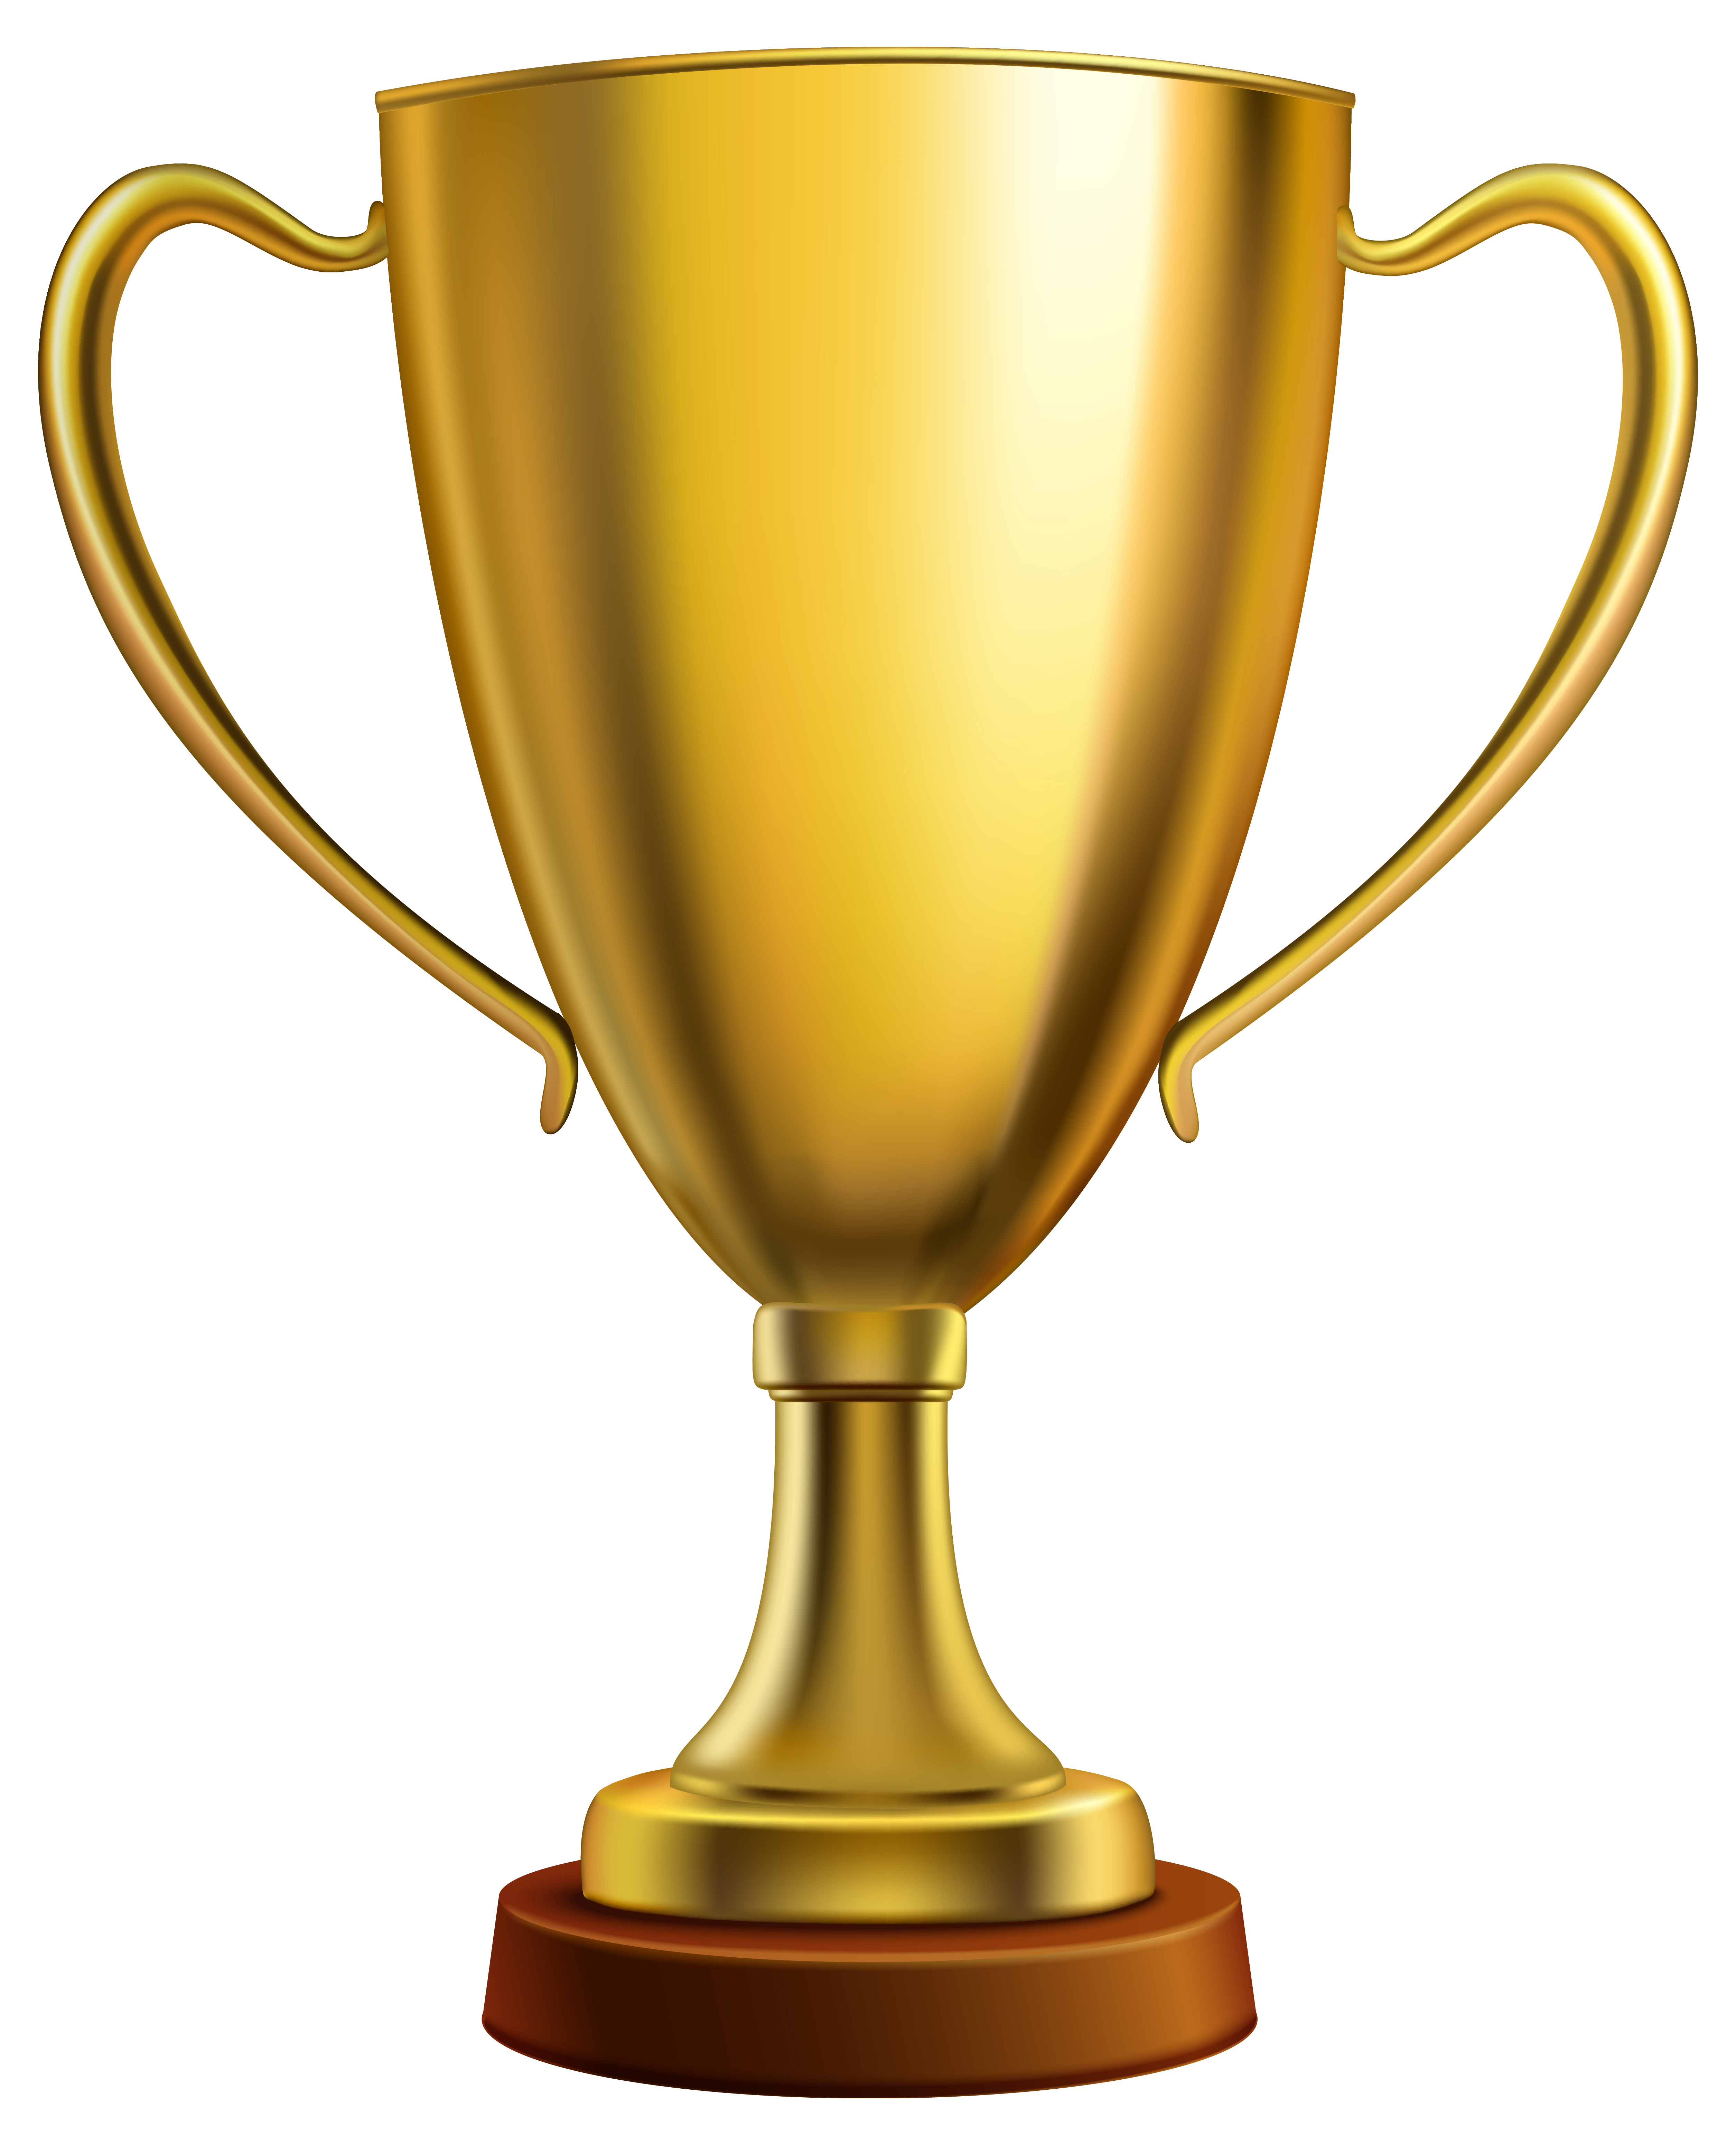 Gold Cup Trophy PNG Clipart Image